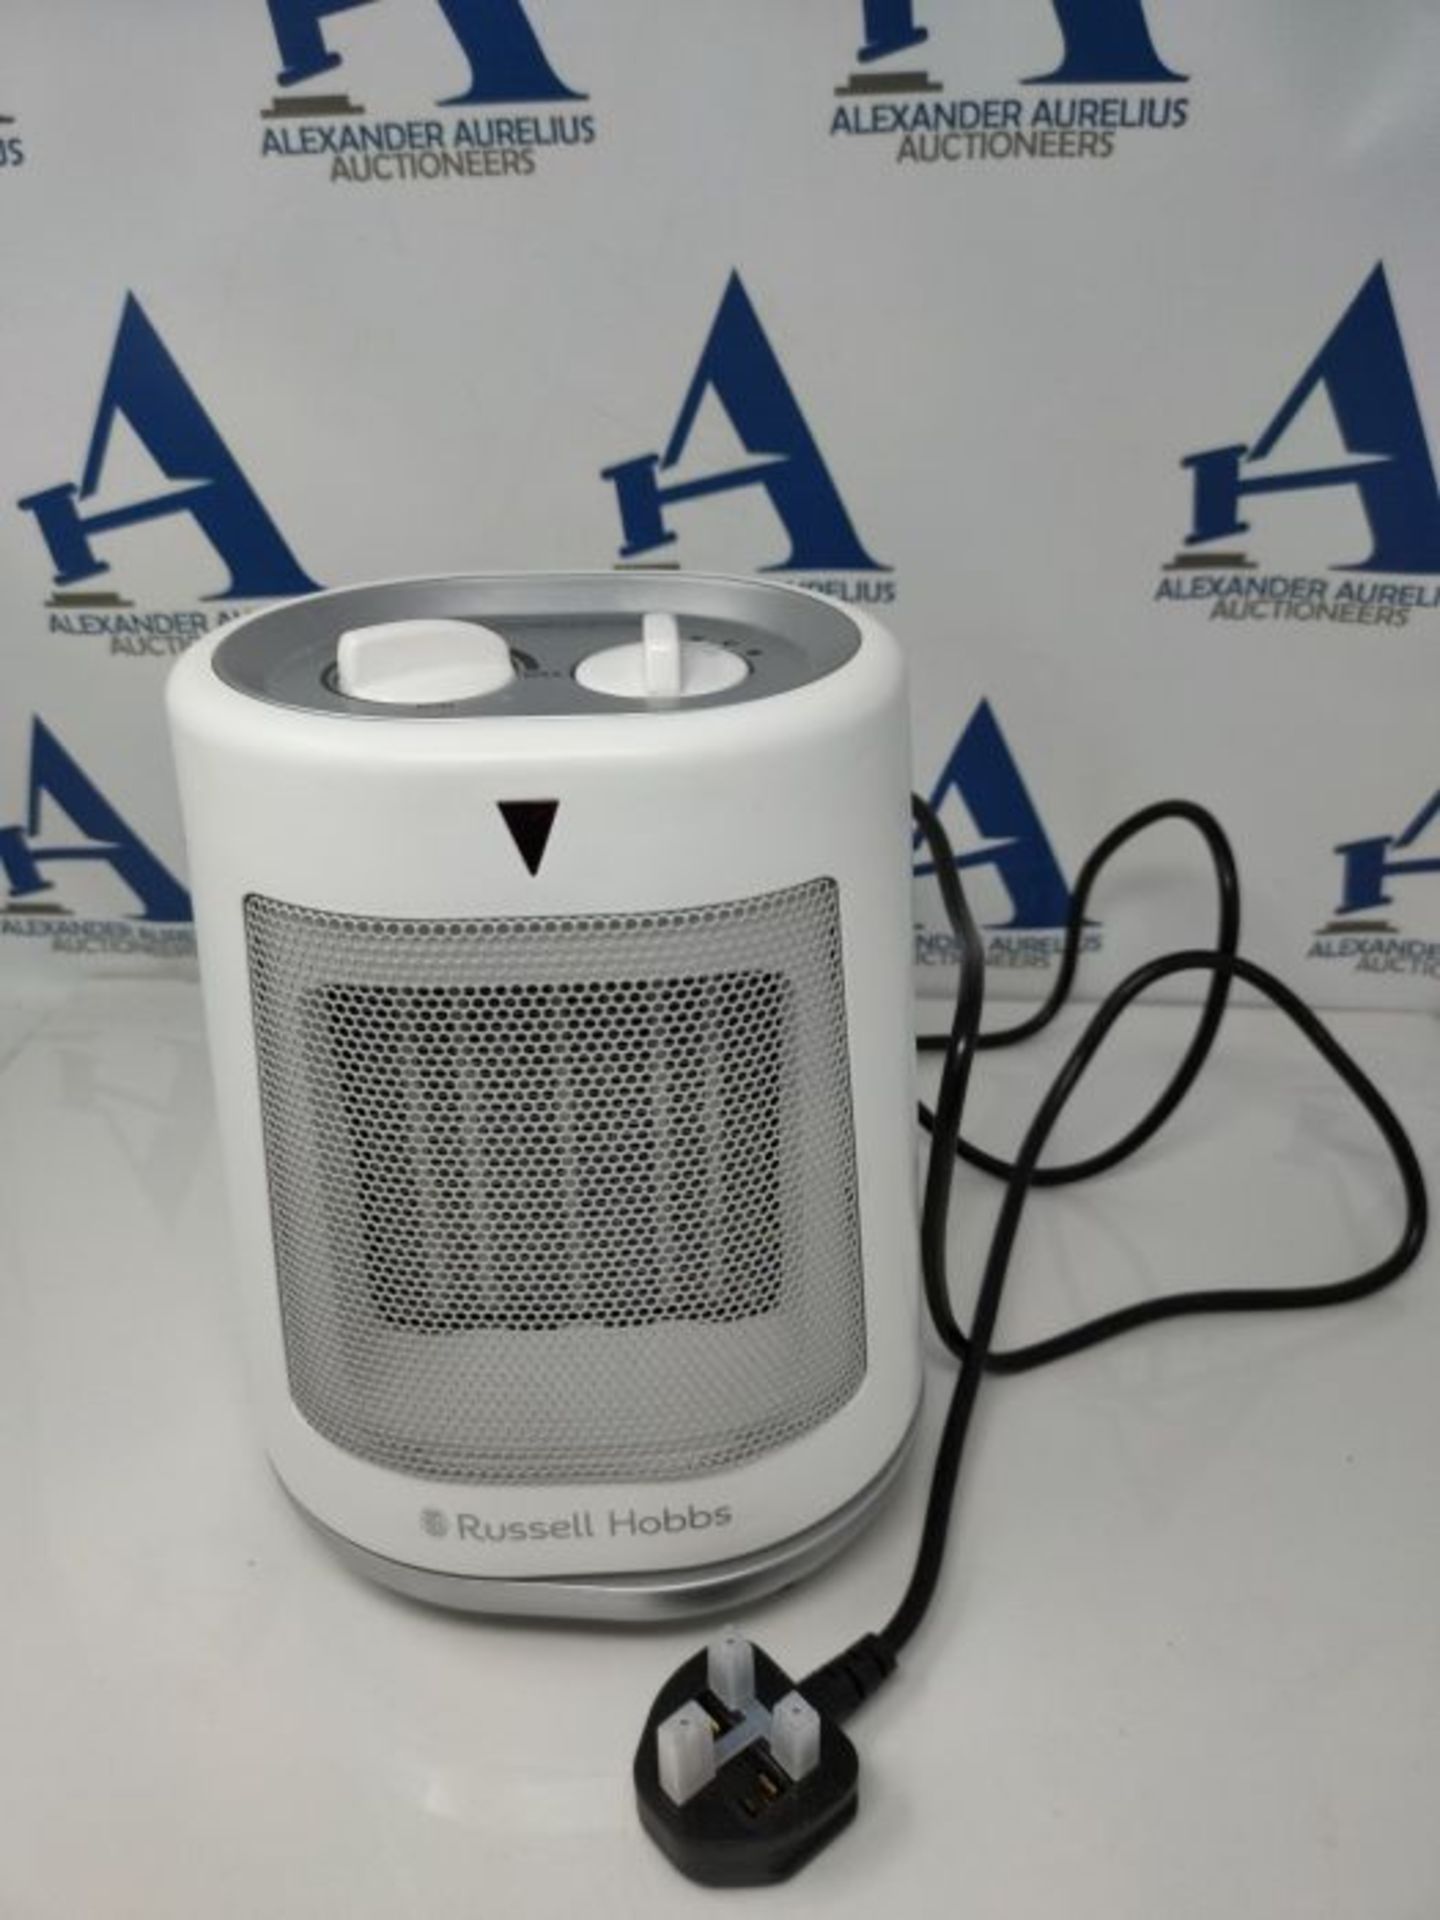 Russell Hobbs 2000W/2KW Electric Heater in White PTC Ceramic Heater, Portable Oscillat - Image 3 of 3